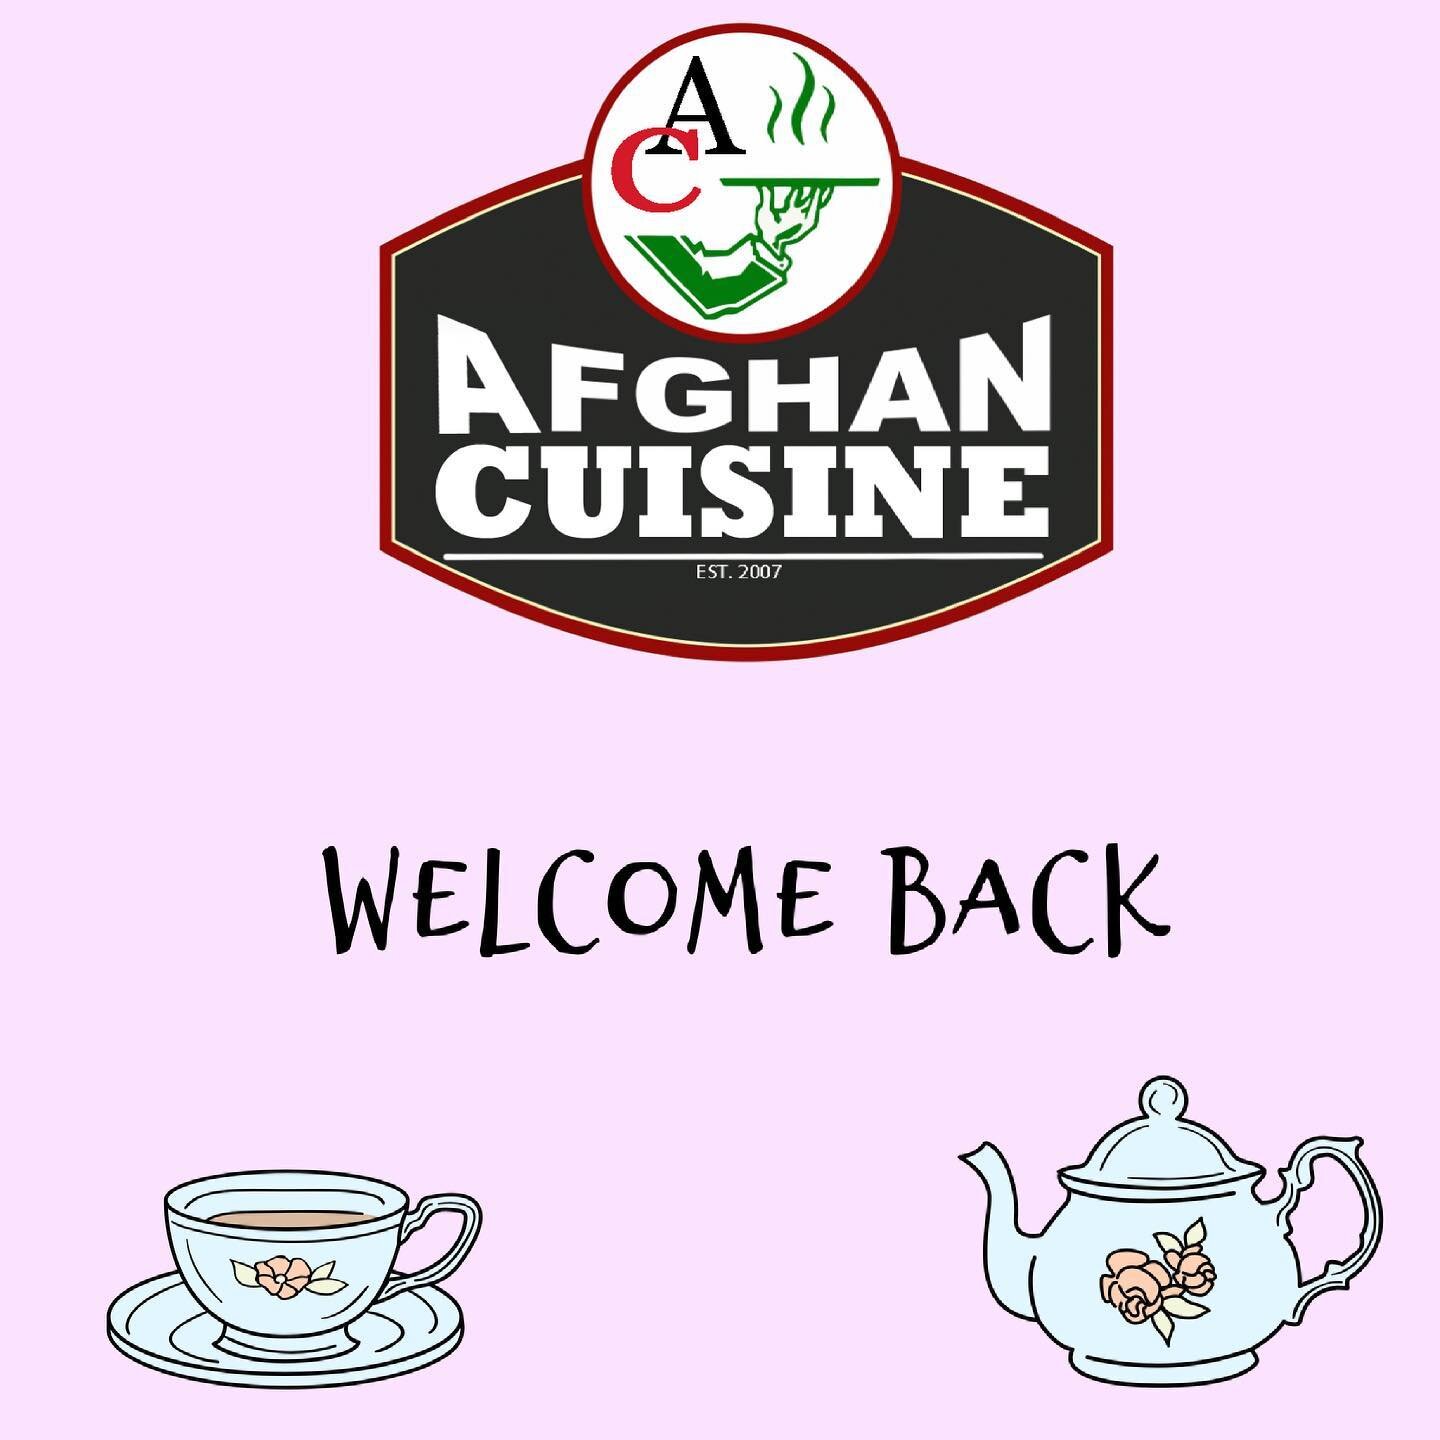 Afghan Cuisine is reopening its doors just in time for summer!! come in and enjoy one of our savoury meals with a cup of our aromatic special cardamom tea and cool down afterwards with a bowl of our signature artisanal Saffron Ice cream or a glass of